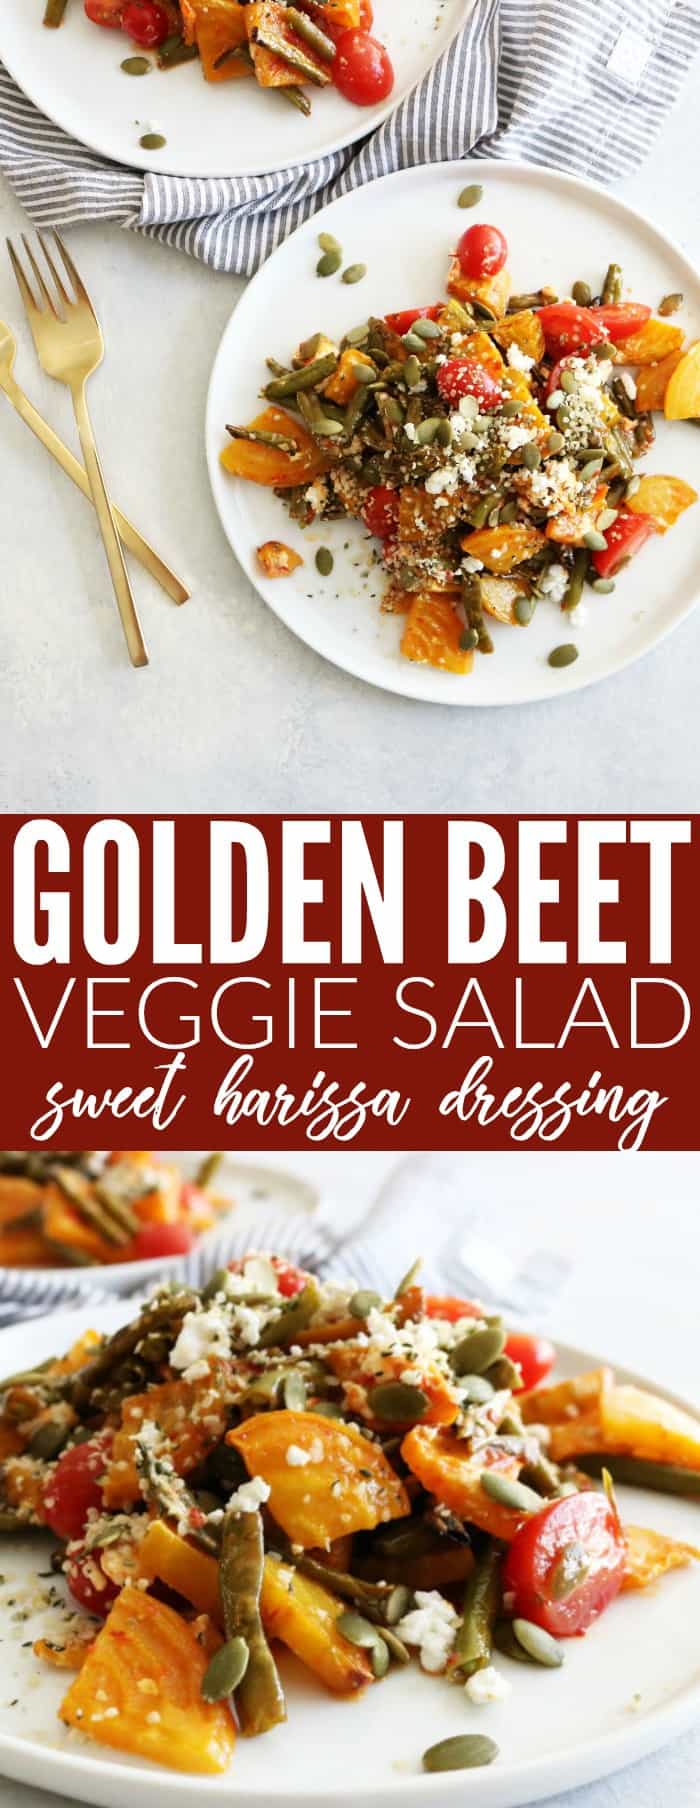 You'll love this veggie packed Roasted Golden Beet Salad with Harissa! The sweet and spicy harissa dressing is so tasty! #lowcarb #vegetarian #glutenfree thetoastedpinenut.com